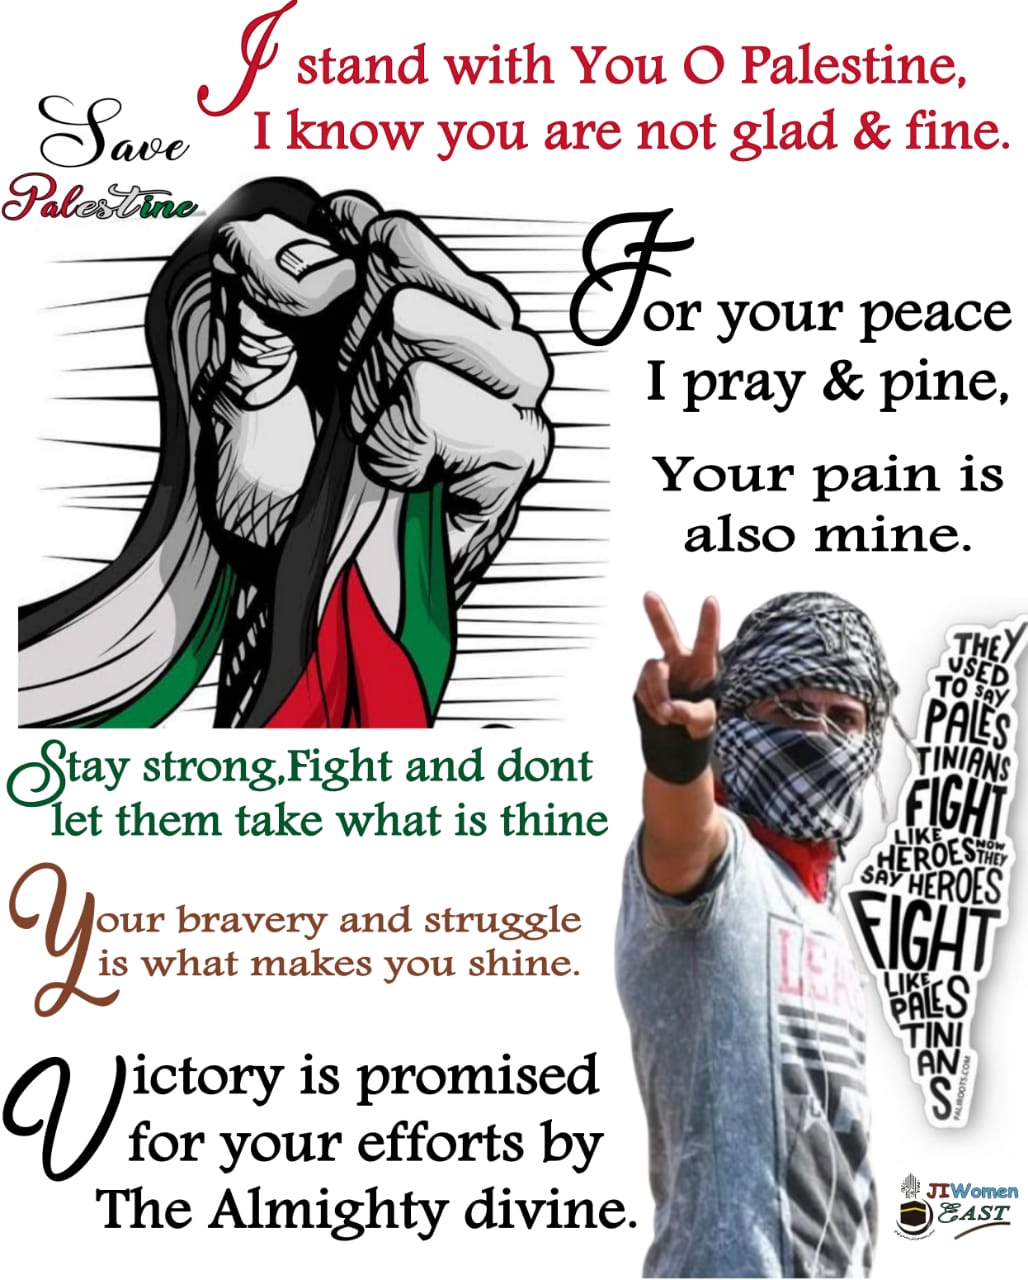 My name is i stand for palestine